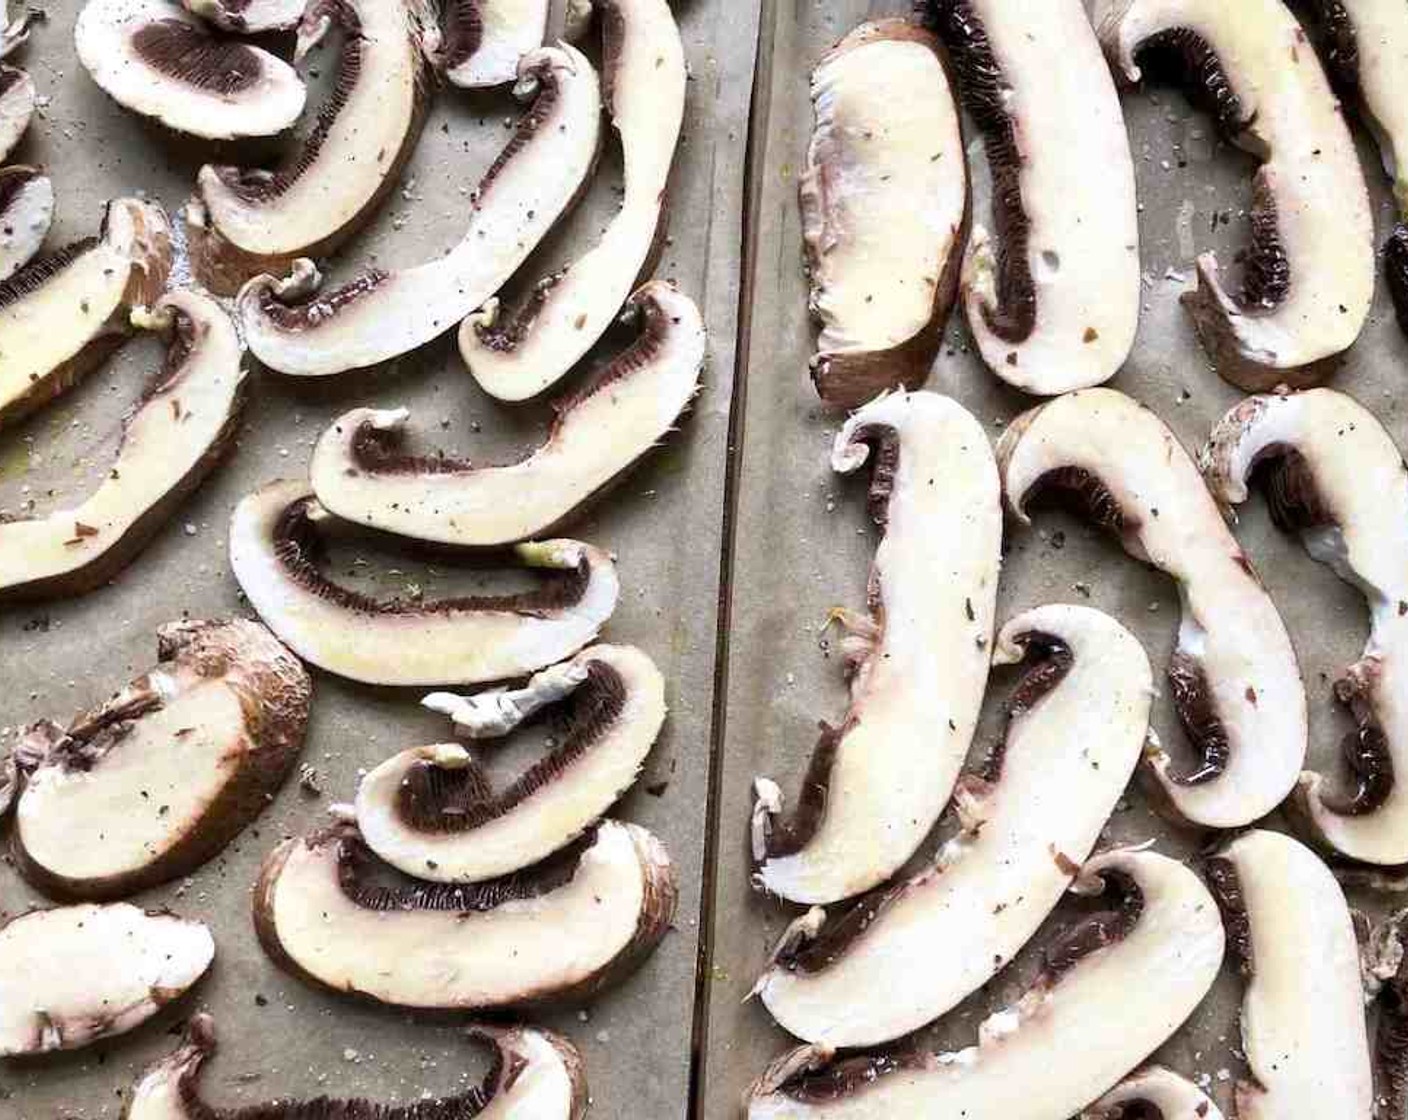 step 7 Arrange the Large Portobello Mushrooms (4) on large rimmed sheet pans lined with parchment paper. Brush generously with olive oil and sprinkle lightly with salt and pepper.